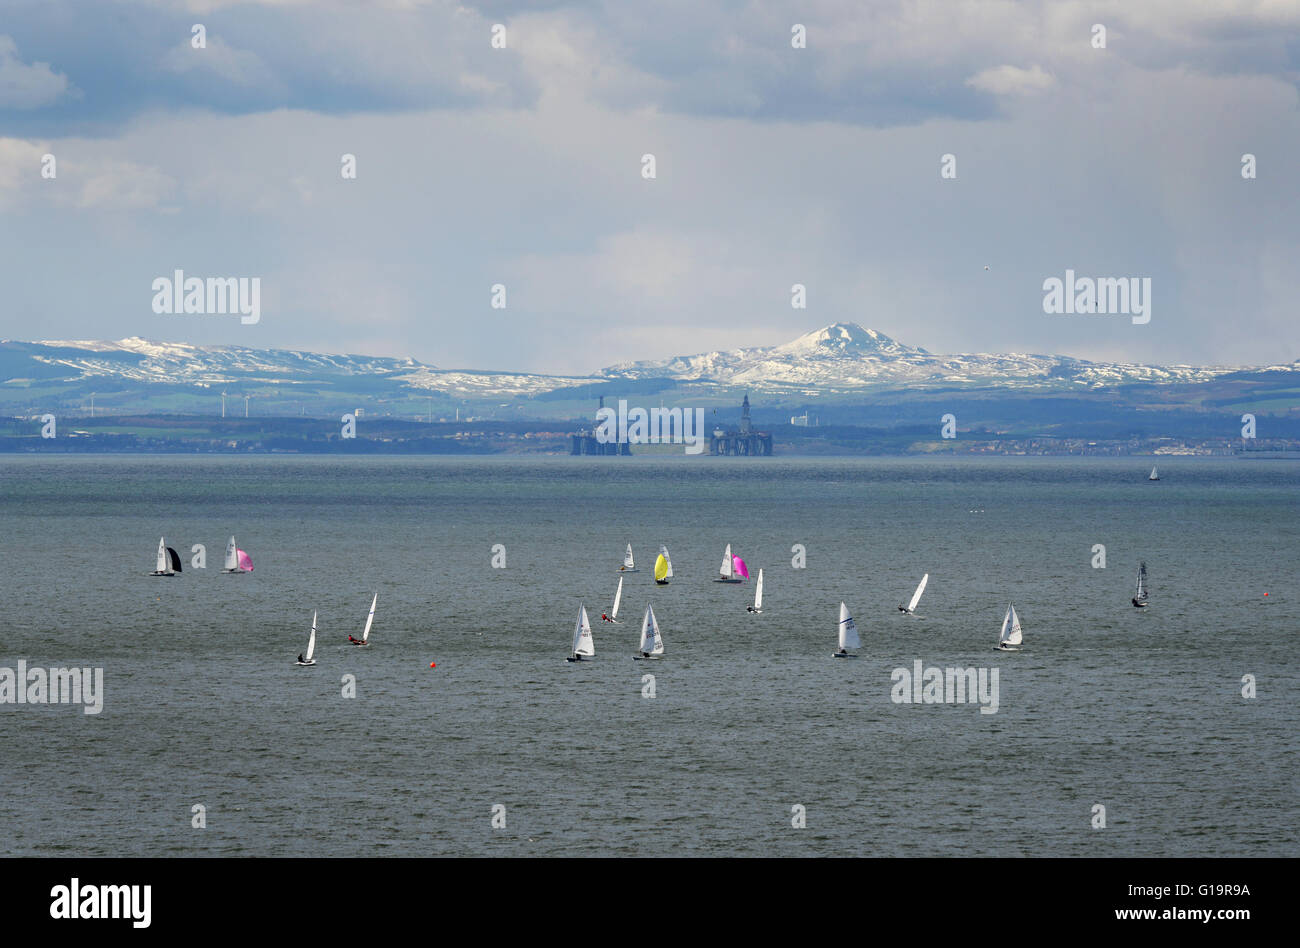 Dingies bobbing up and down looking across the Firth of Fourth towards unused oil-rigs and the Lomond Hills beyond. Stock Photo